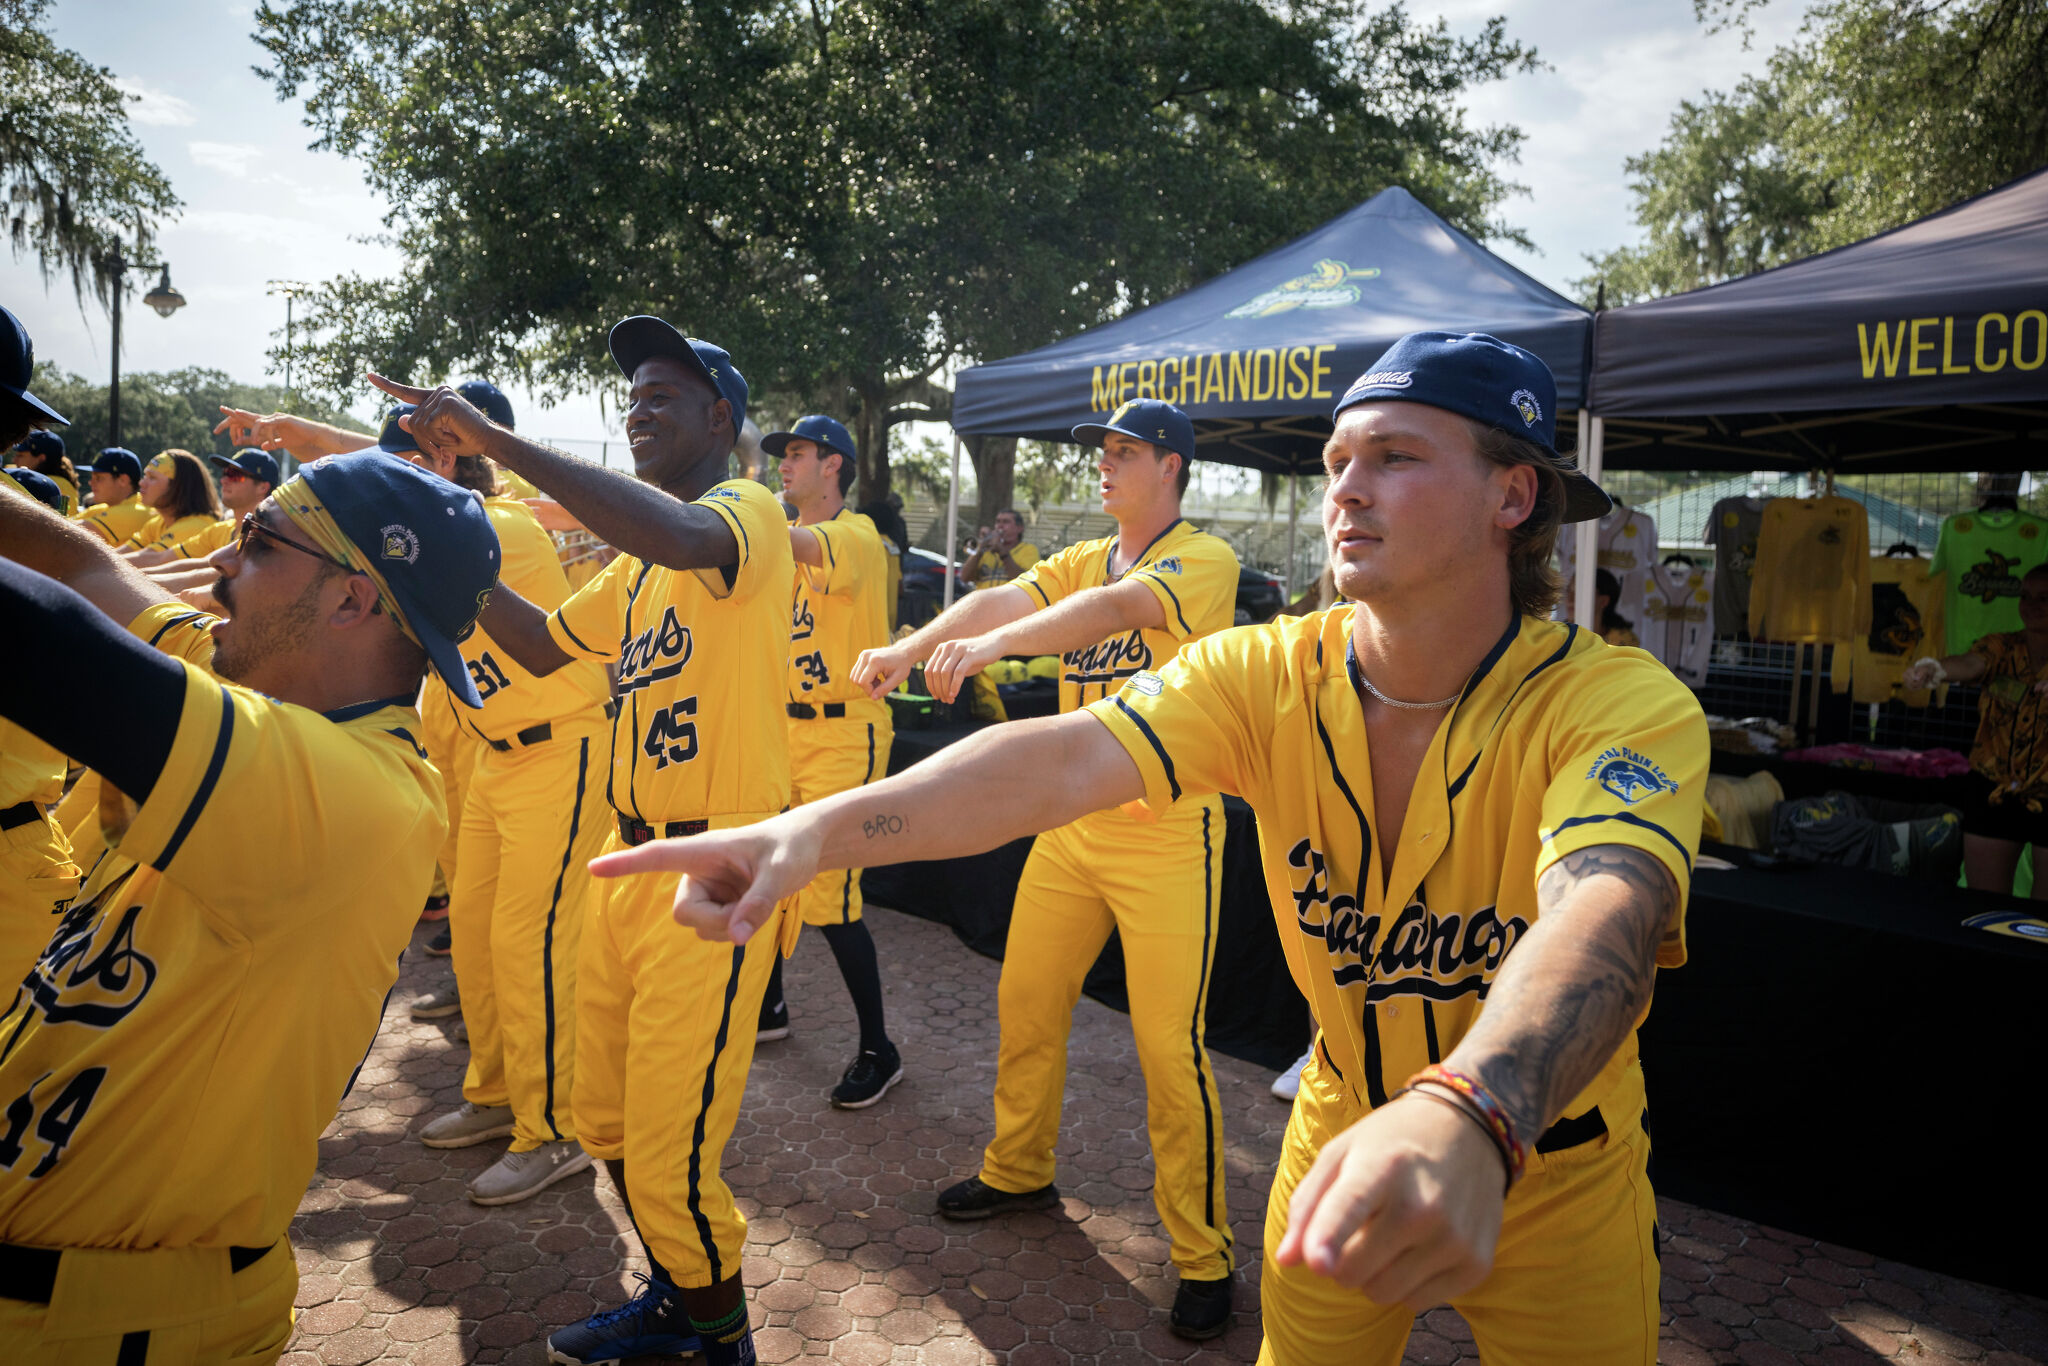 What to know about the Savannah Bananas ahead of their Des Moines stop